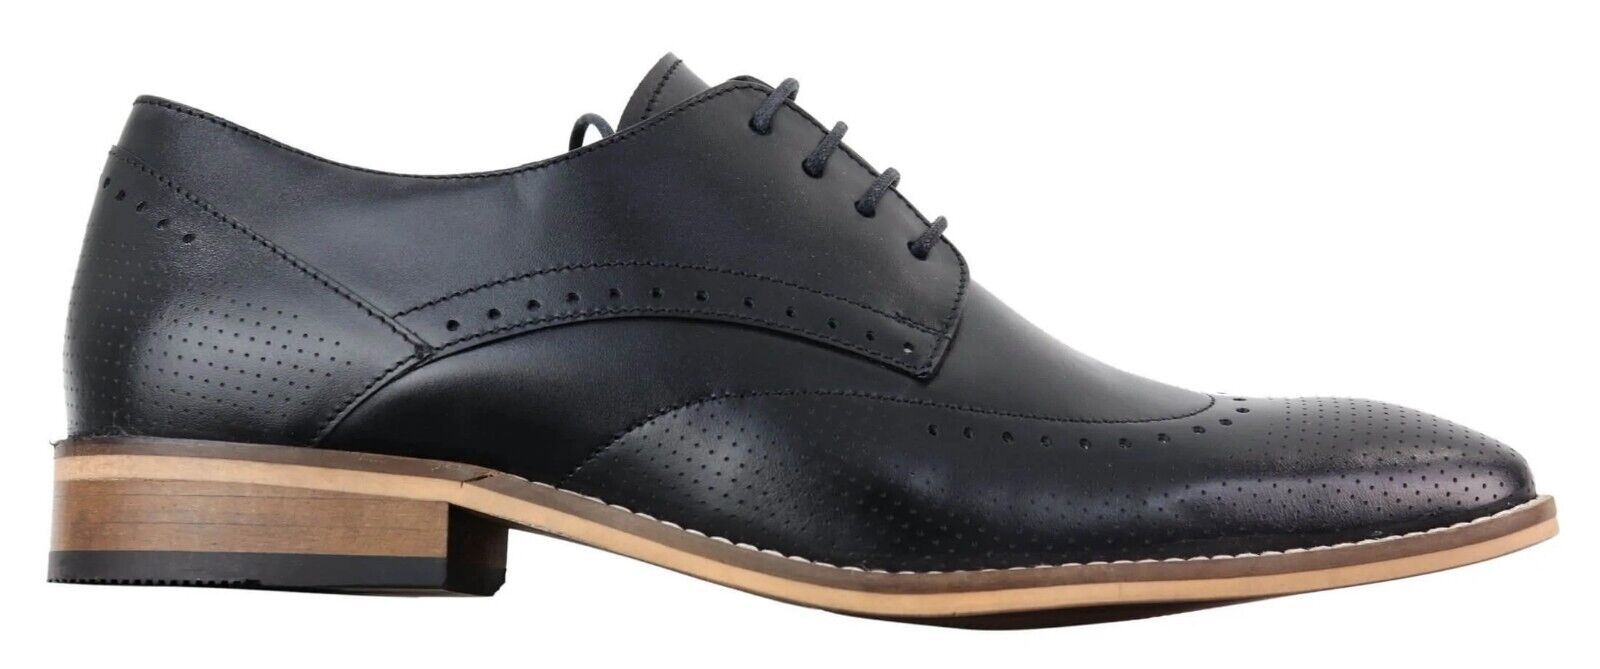 Mens Classic Oxford Brogue Shoes in Perforated Black Leather